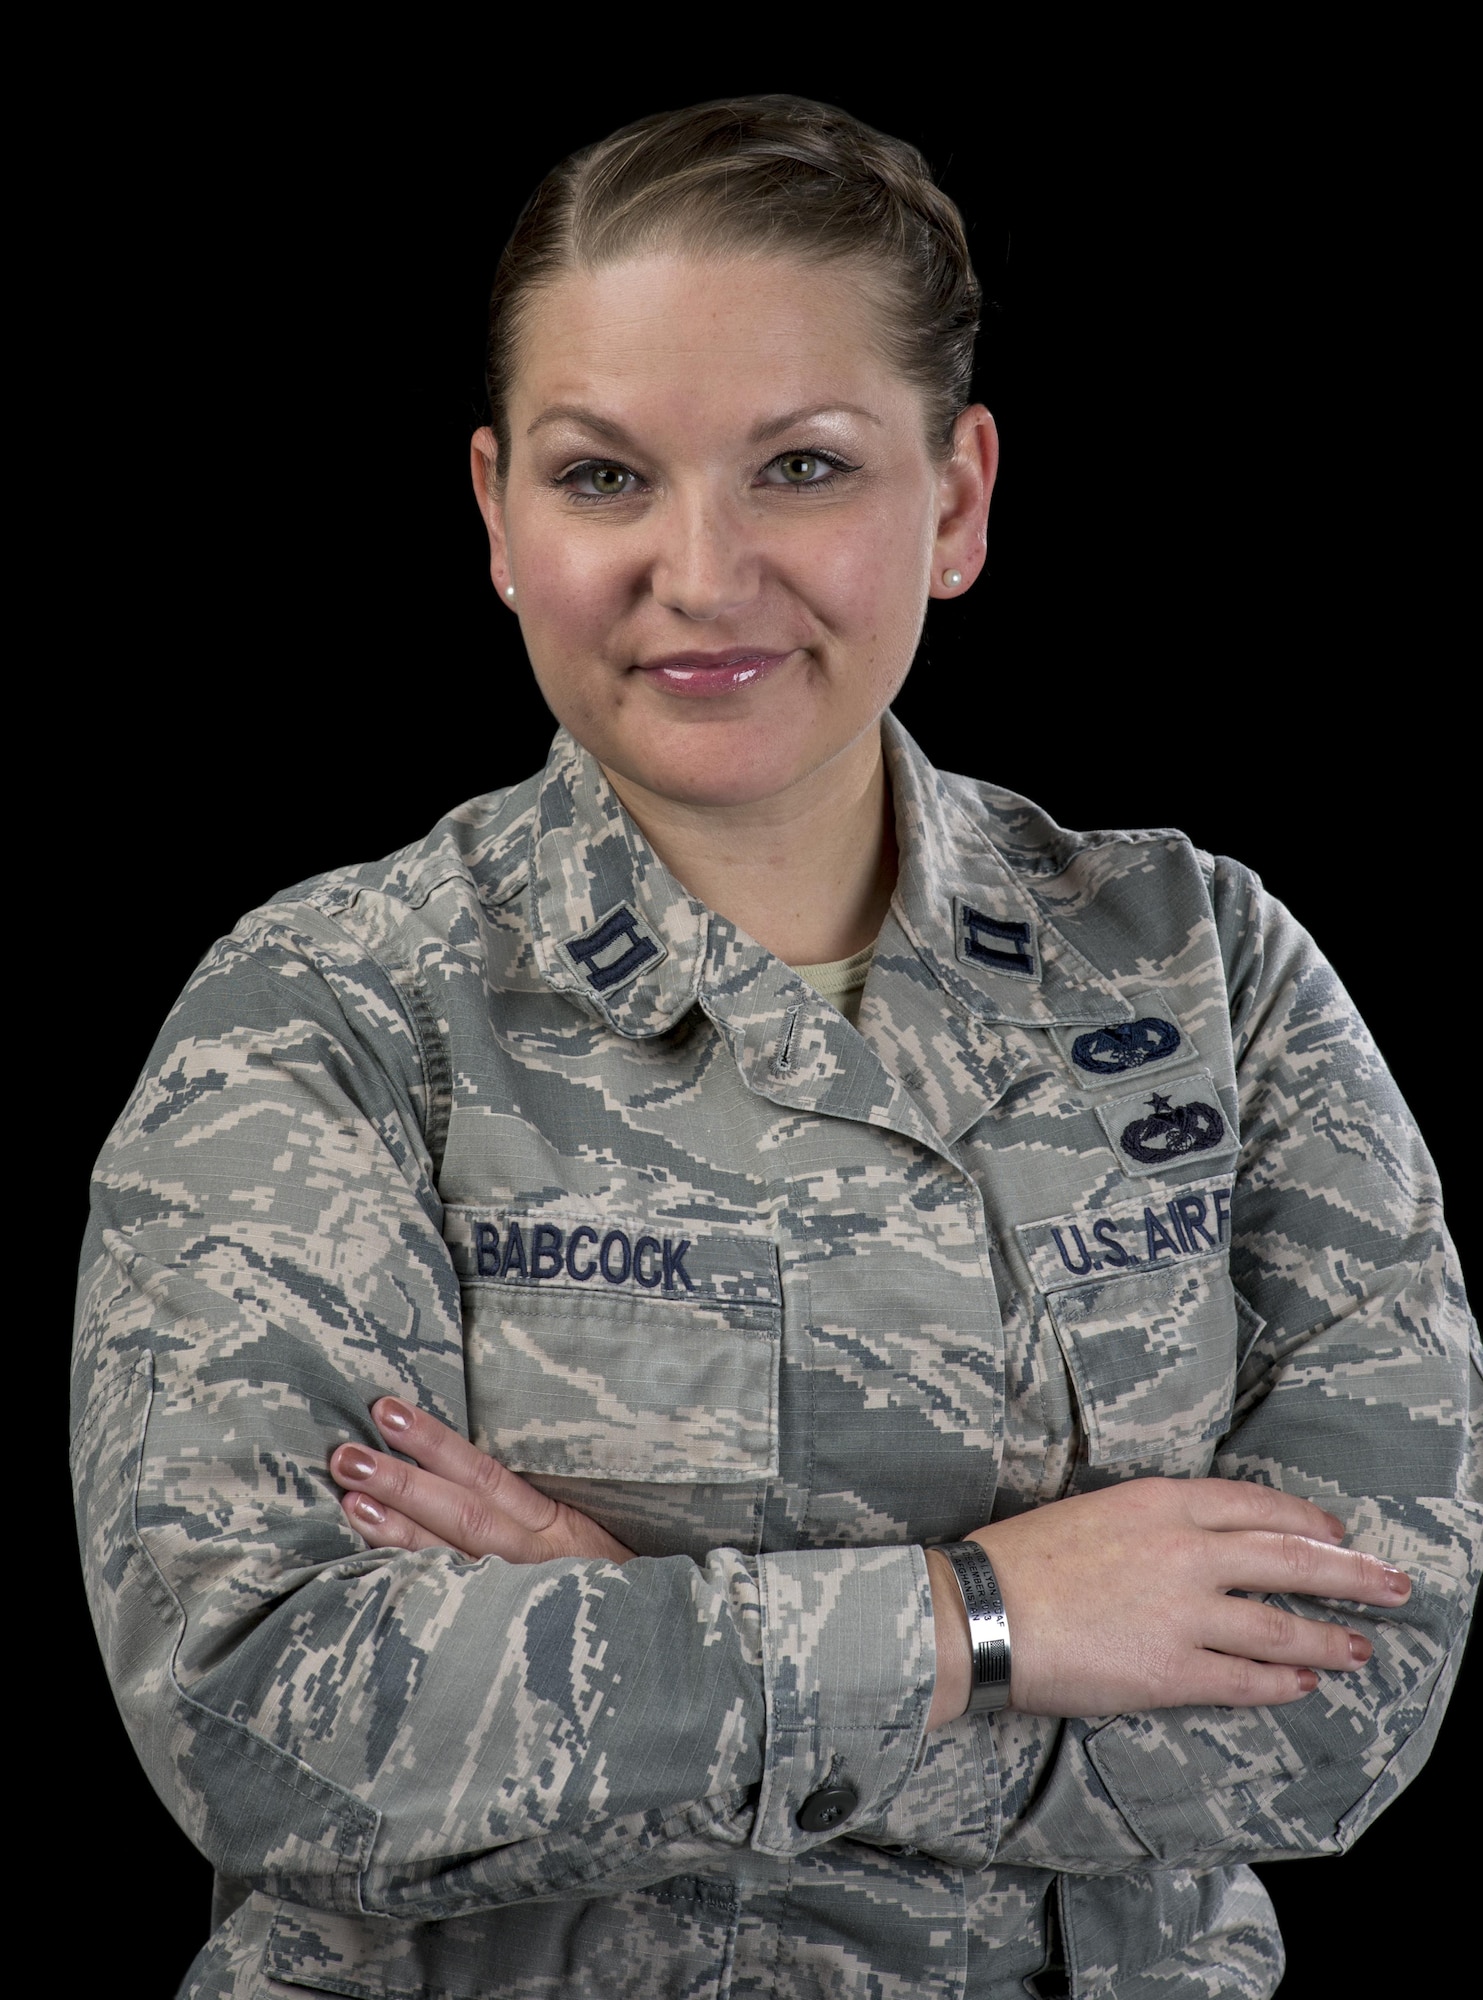 Capt. Leanne Babcock, 349th Logistics Readiness Squadron, operations officer, displays the tokens that she always keeps near, July 27, 2017 Travis Air Force Base, Calif.